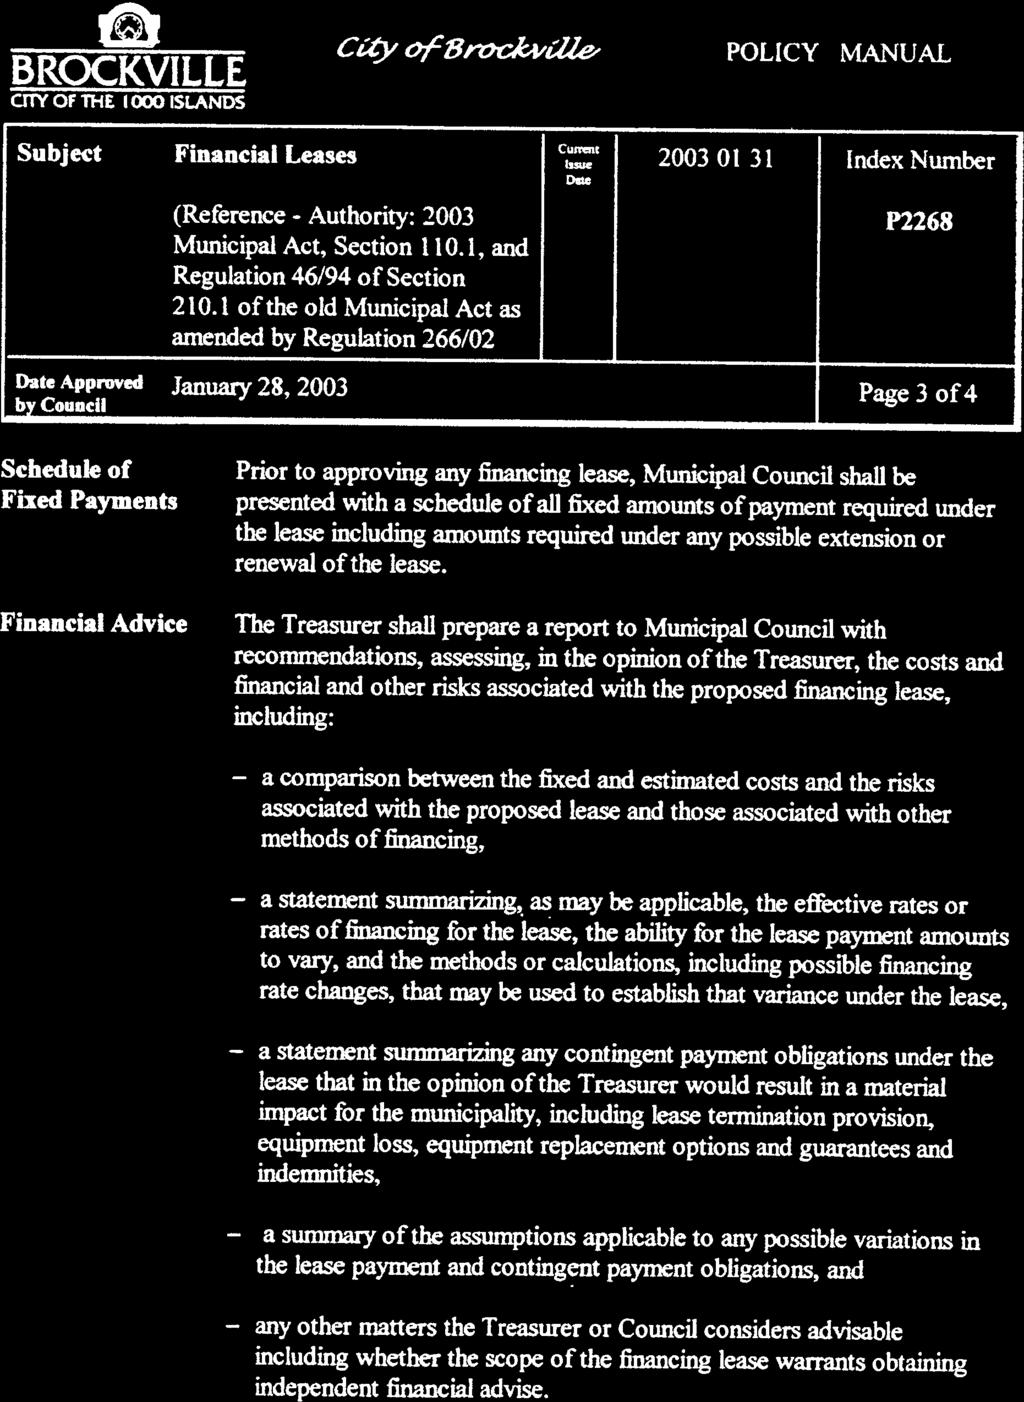 BROCKVILLE CI1Y OF THE (000 ISLANDS City of8,vckt Llle POLECY MANUAL Subject Financial Leases 2003 01 31 Endex Number (Reference - Authority: 2003 P2268 Municipal Act, Section 1 10.